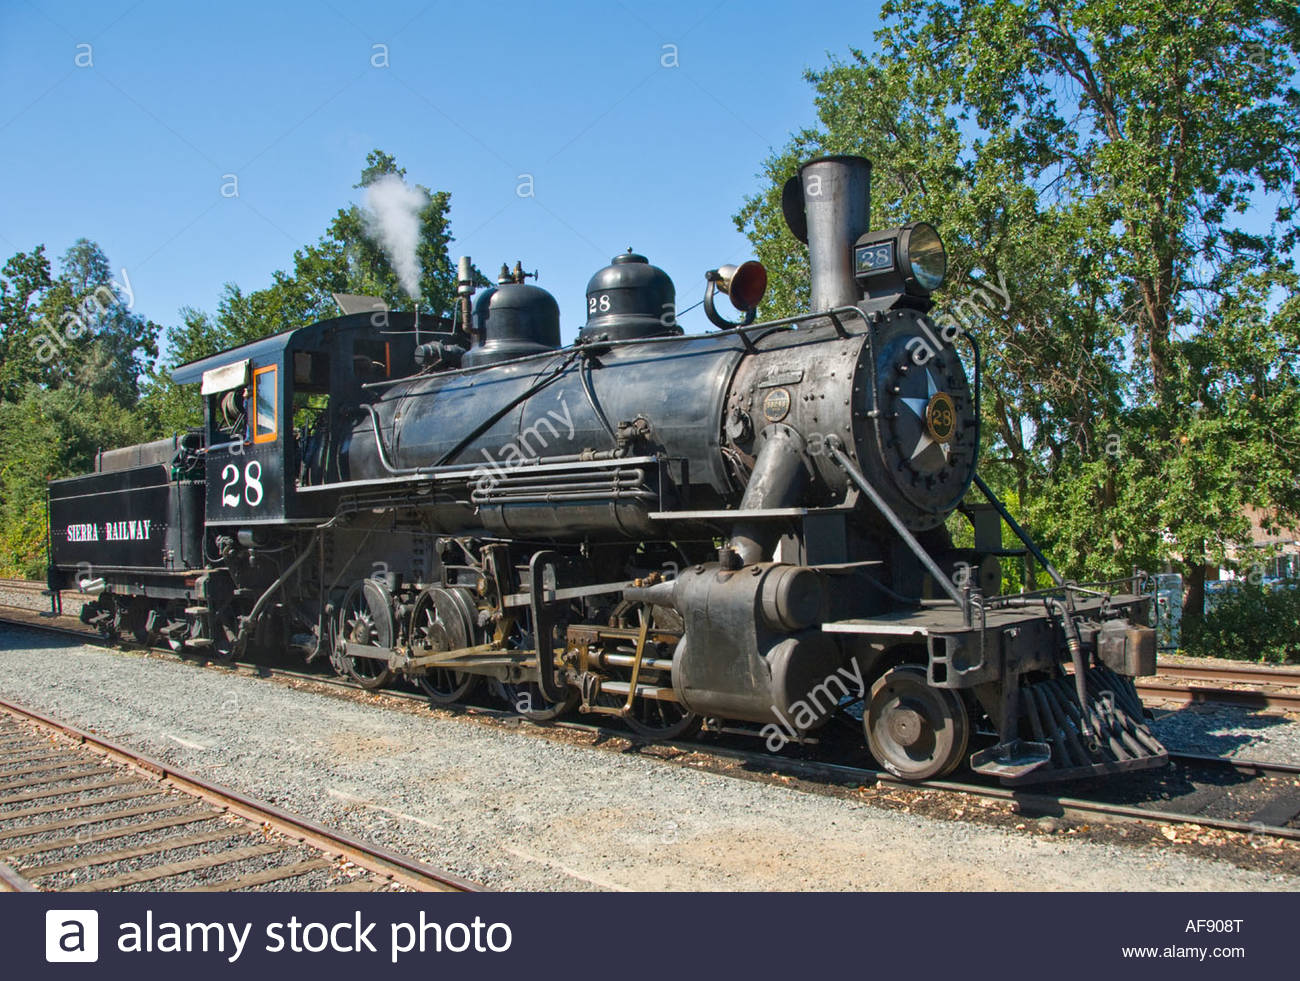 california-gold-country-jamestown-railtown-1897-state-historic-park-AF908T.jpg